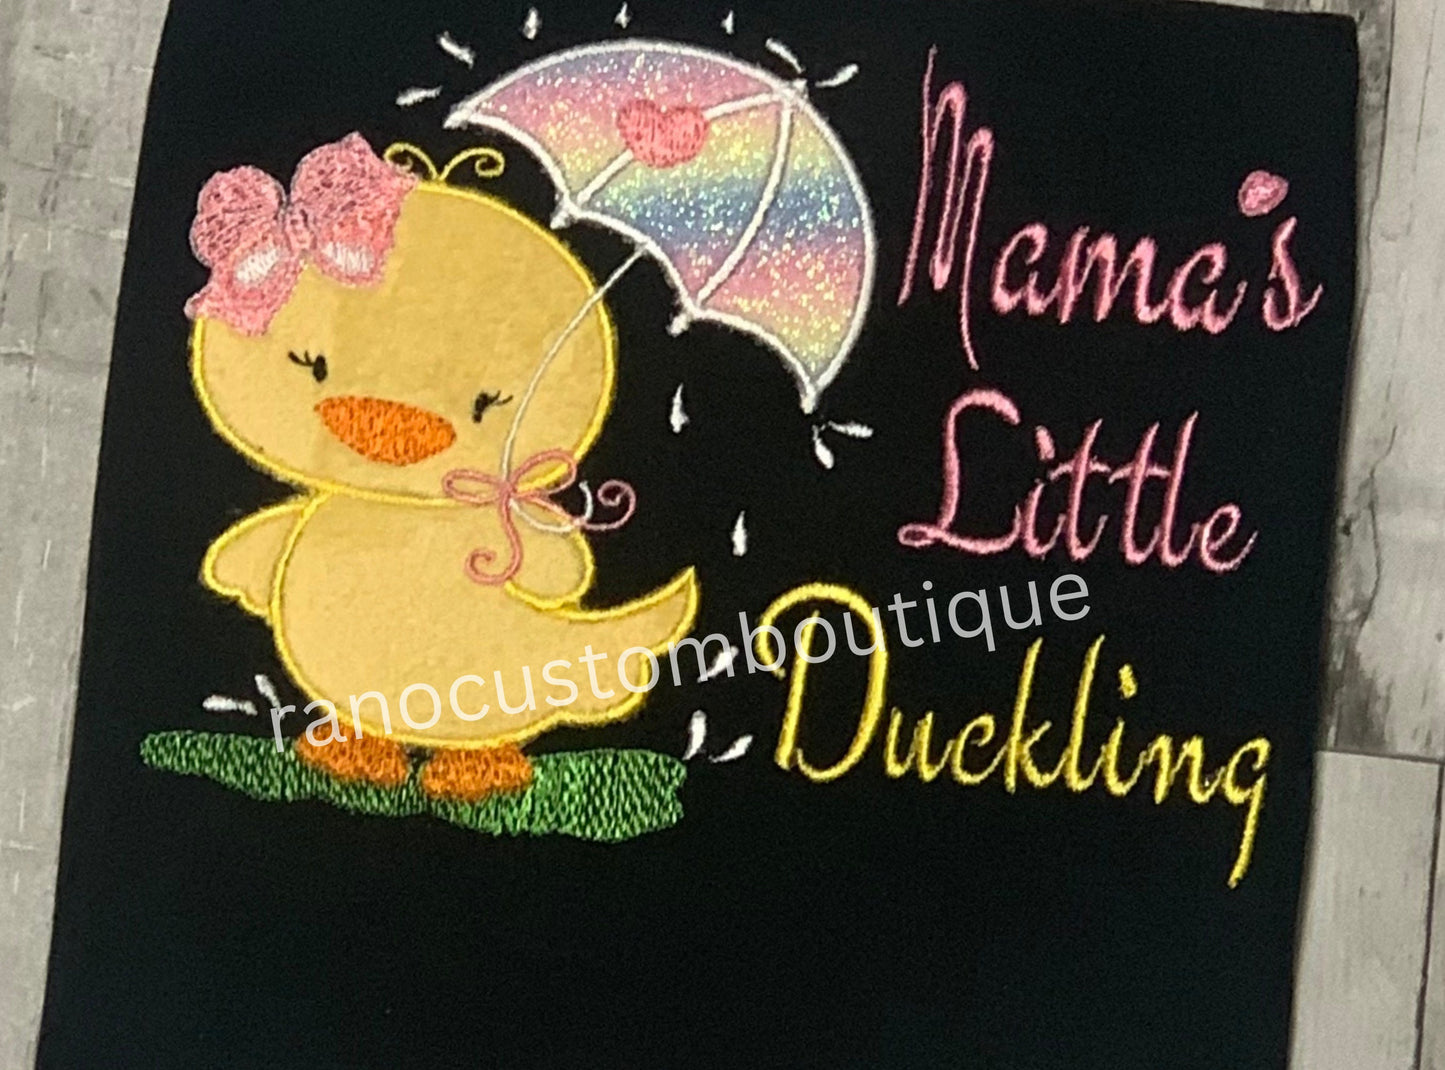 Embroidered Duckling Girl Shirt, Embroidered Girls Clothing, Embroidered Little Duckling Design